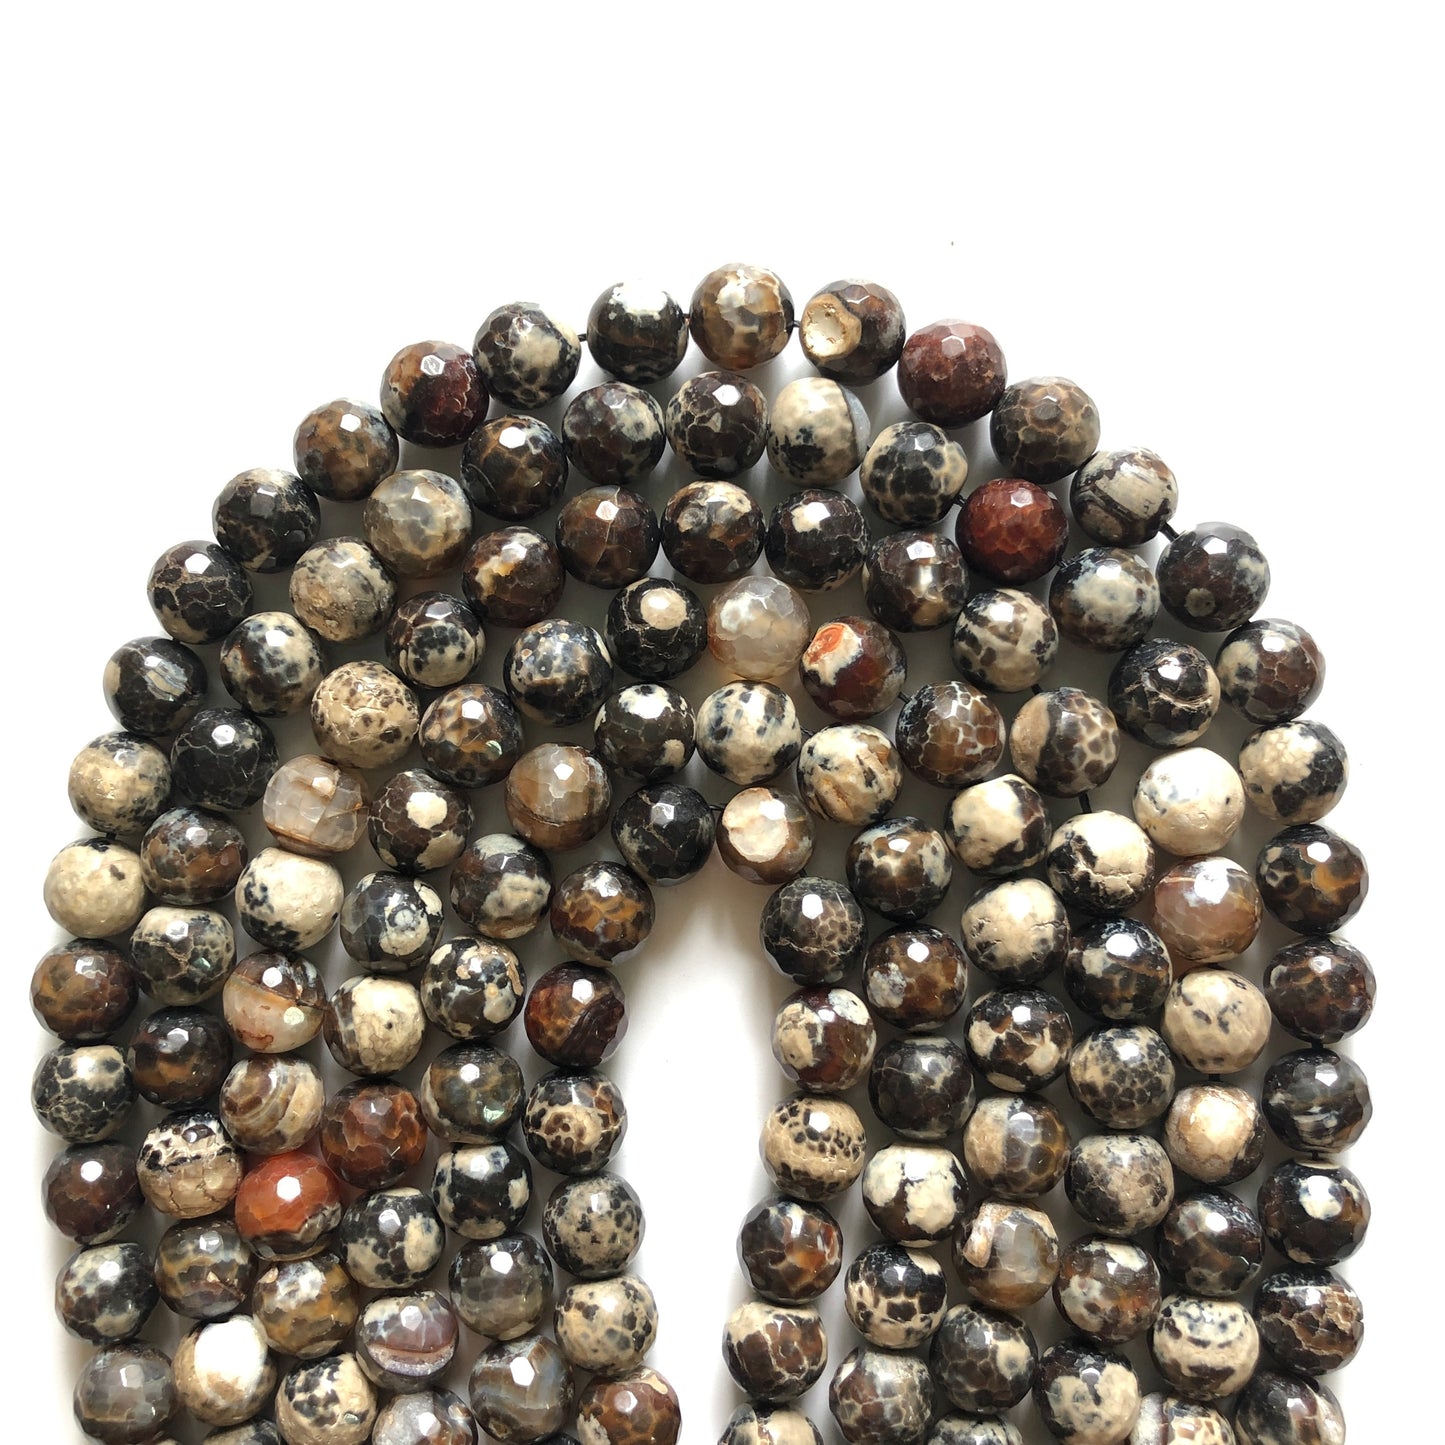 2 Strands/lot 12mm Brown Faceted Fire Agate Stone Beads Stone Beads 12mm Stone Beads Faceted Agate Beads Charms Beads Beyond